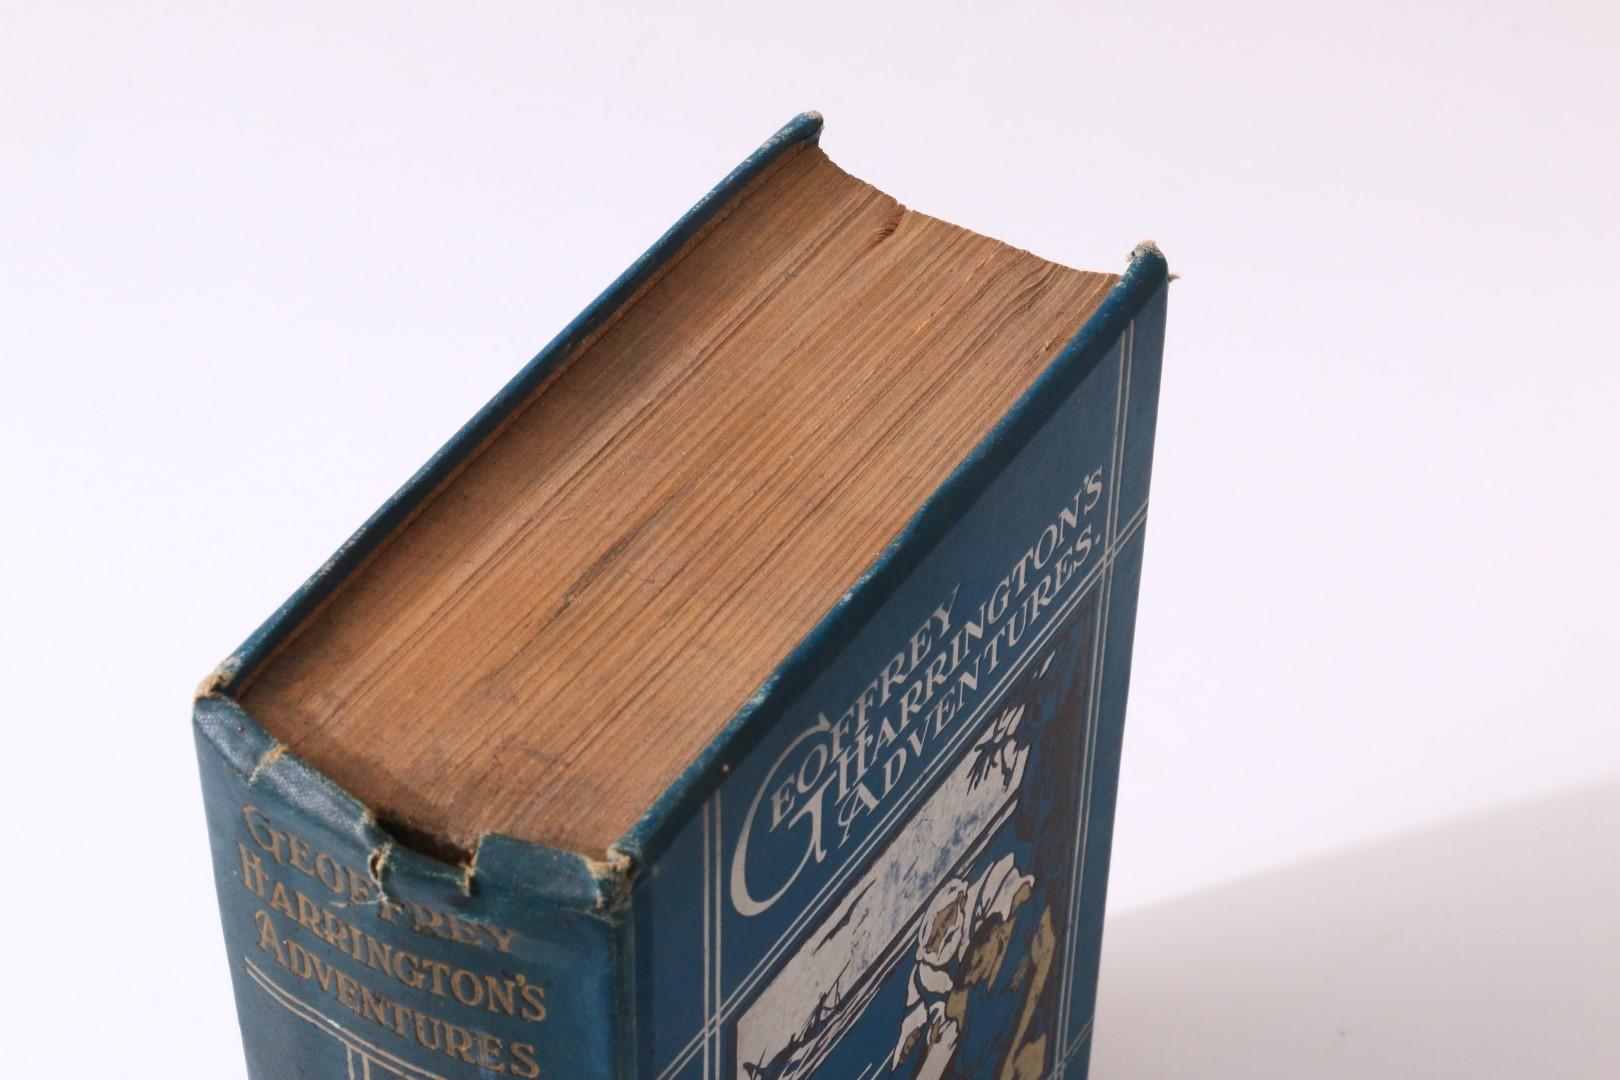 Harry Collingwood - Geoffrey Harrington's Adventures - Society for Promoting Christian Knowledge, n.d. [1907], Signed First Edition.